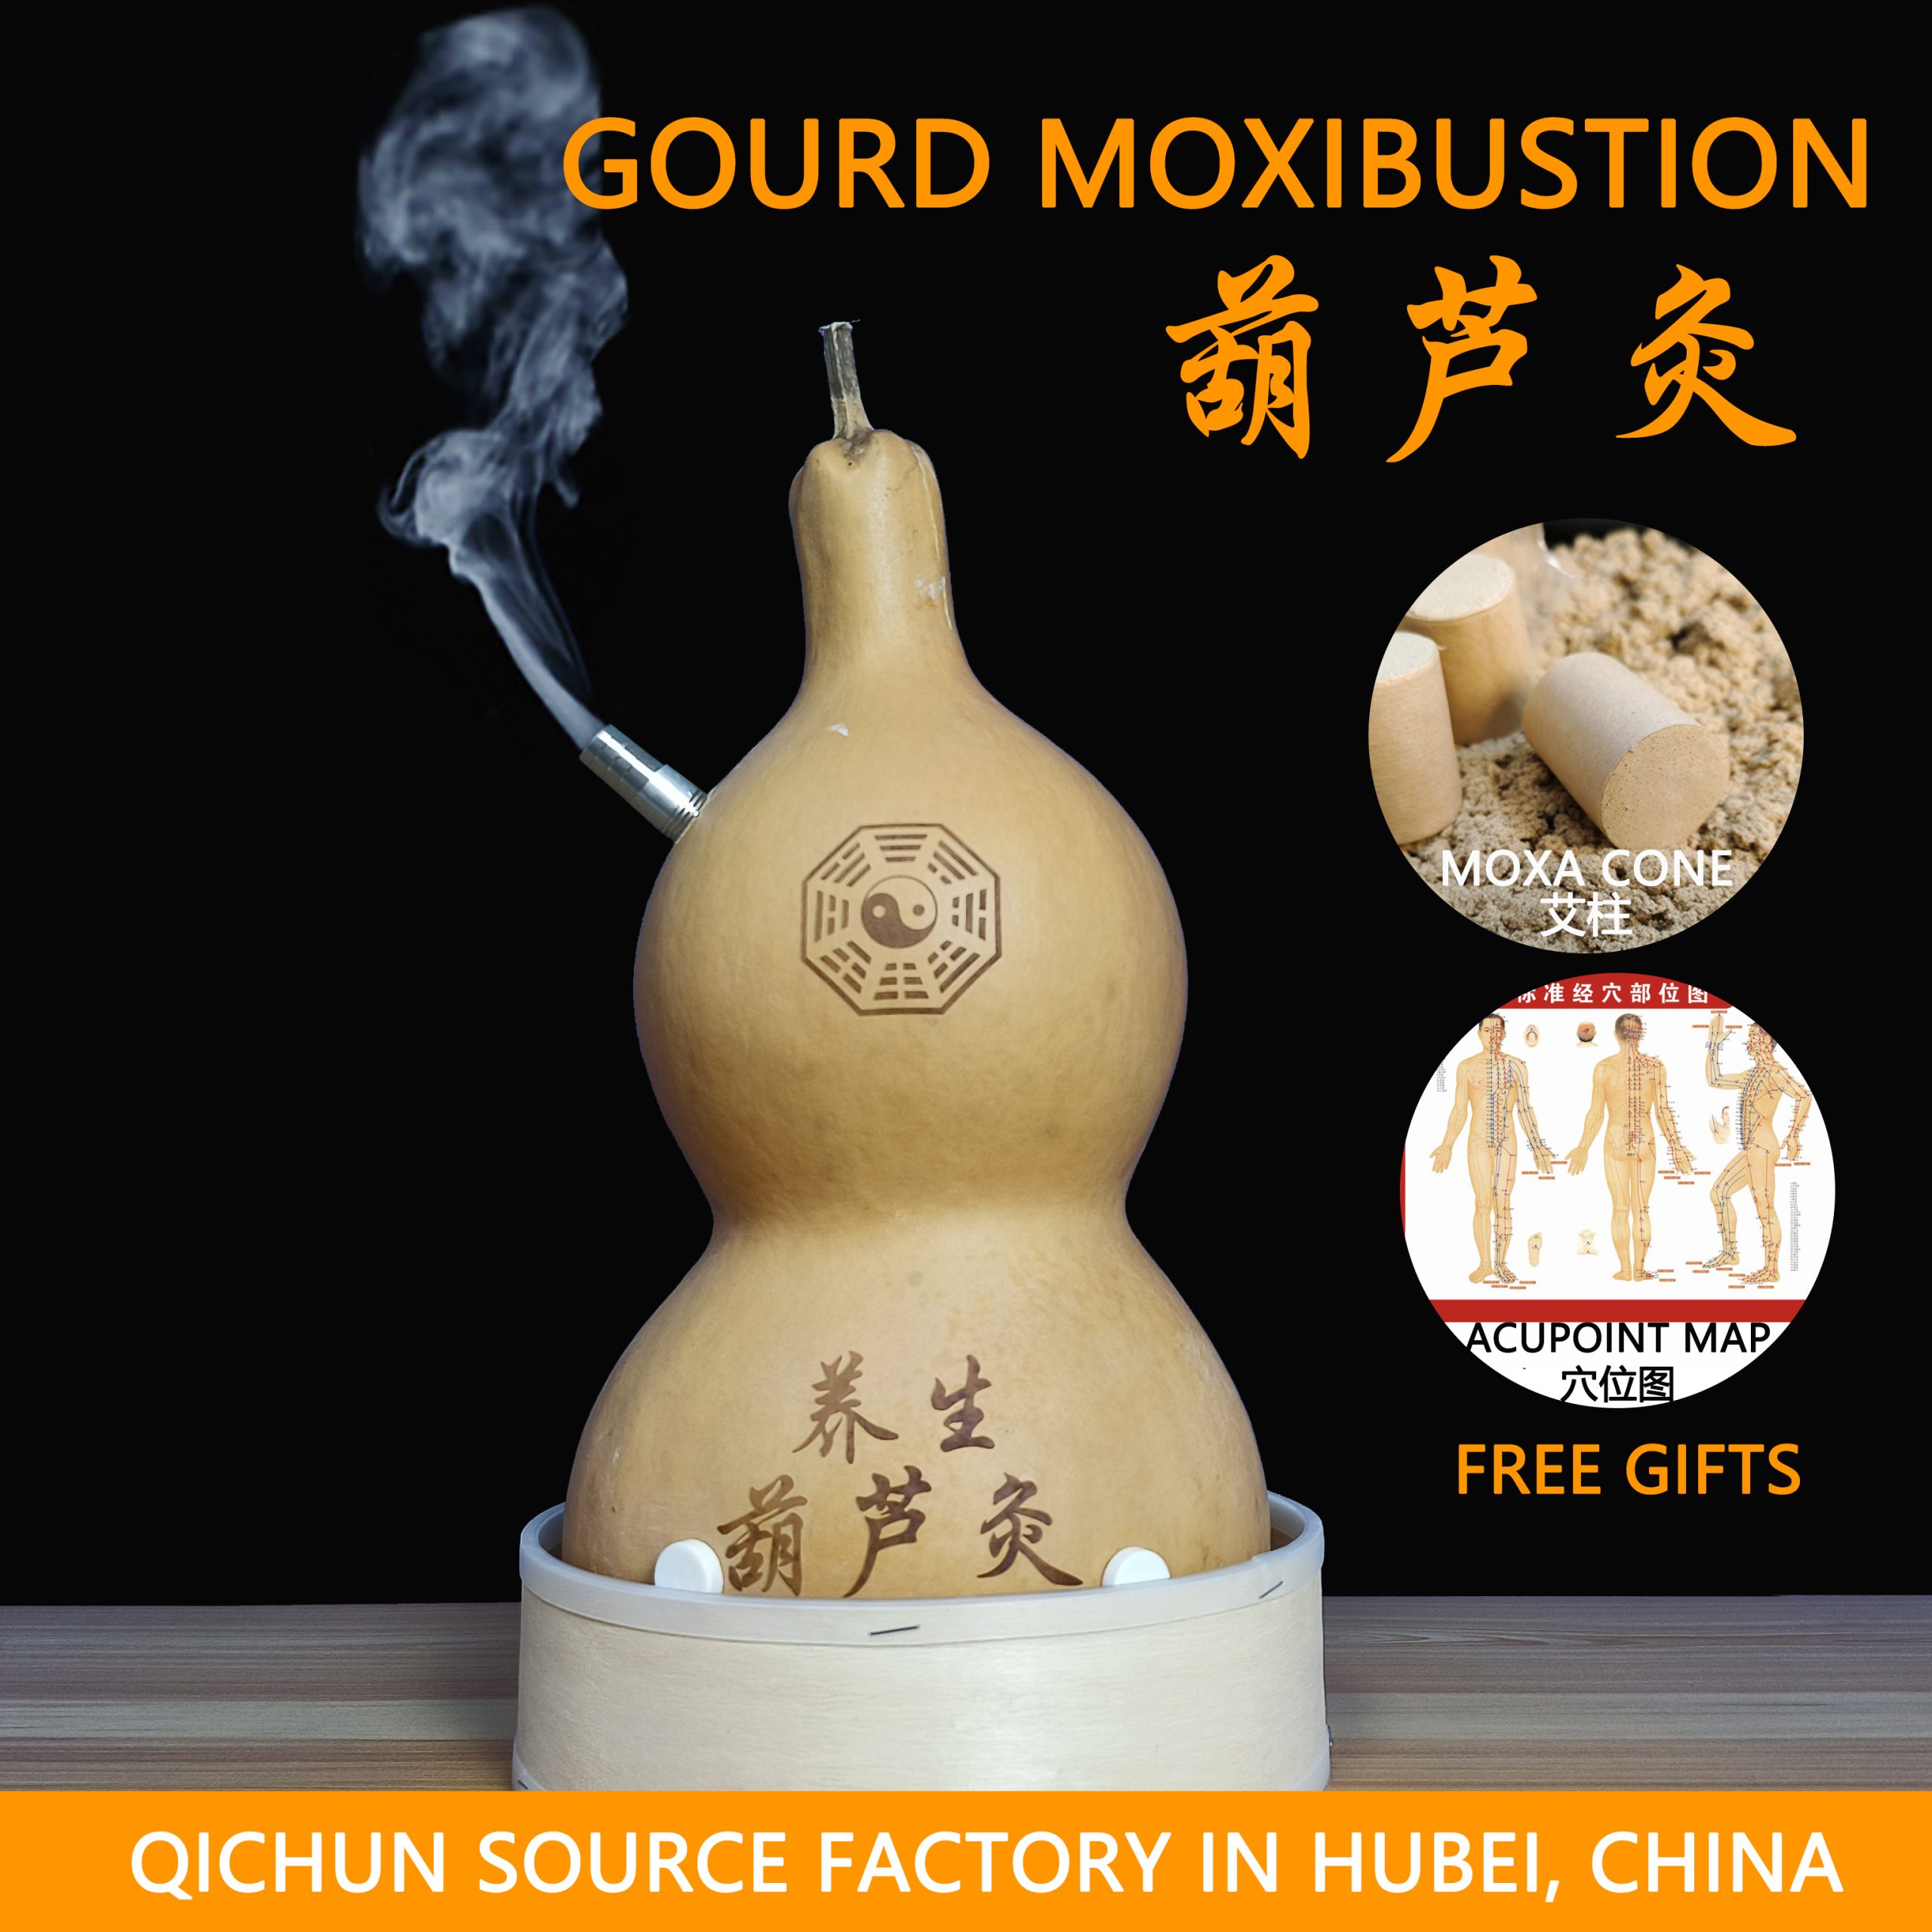 Gourd moxibustion，Chinese Qichun Natural moxa cones，Acupuncture 